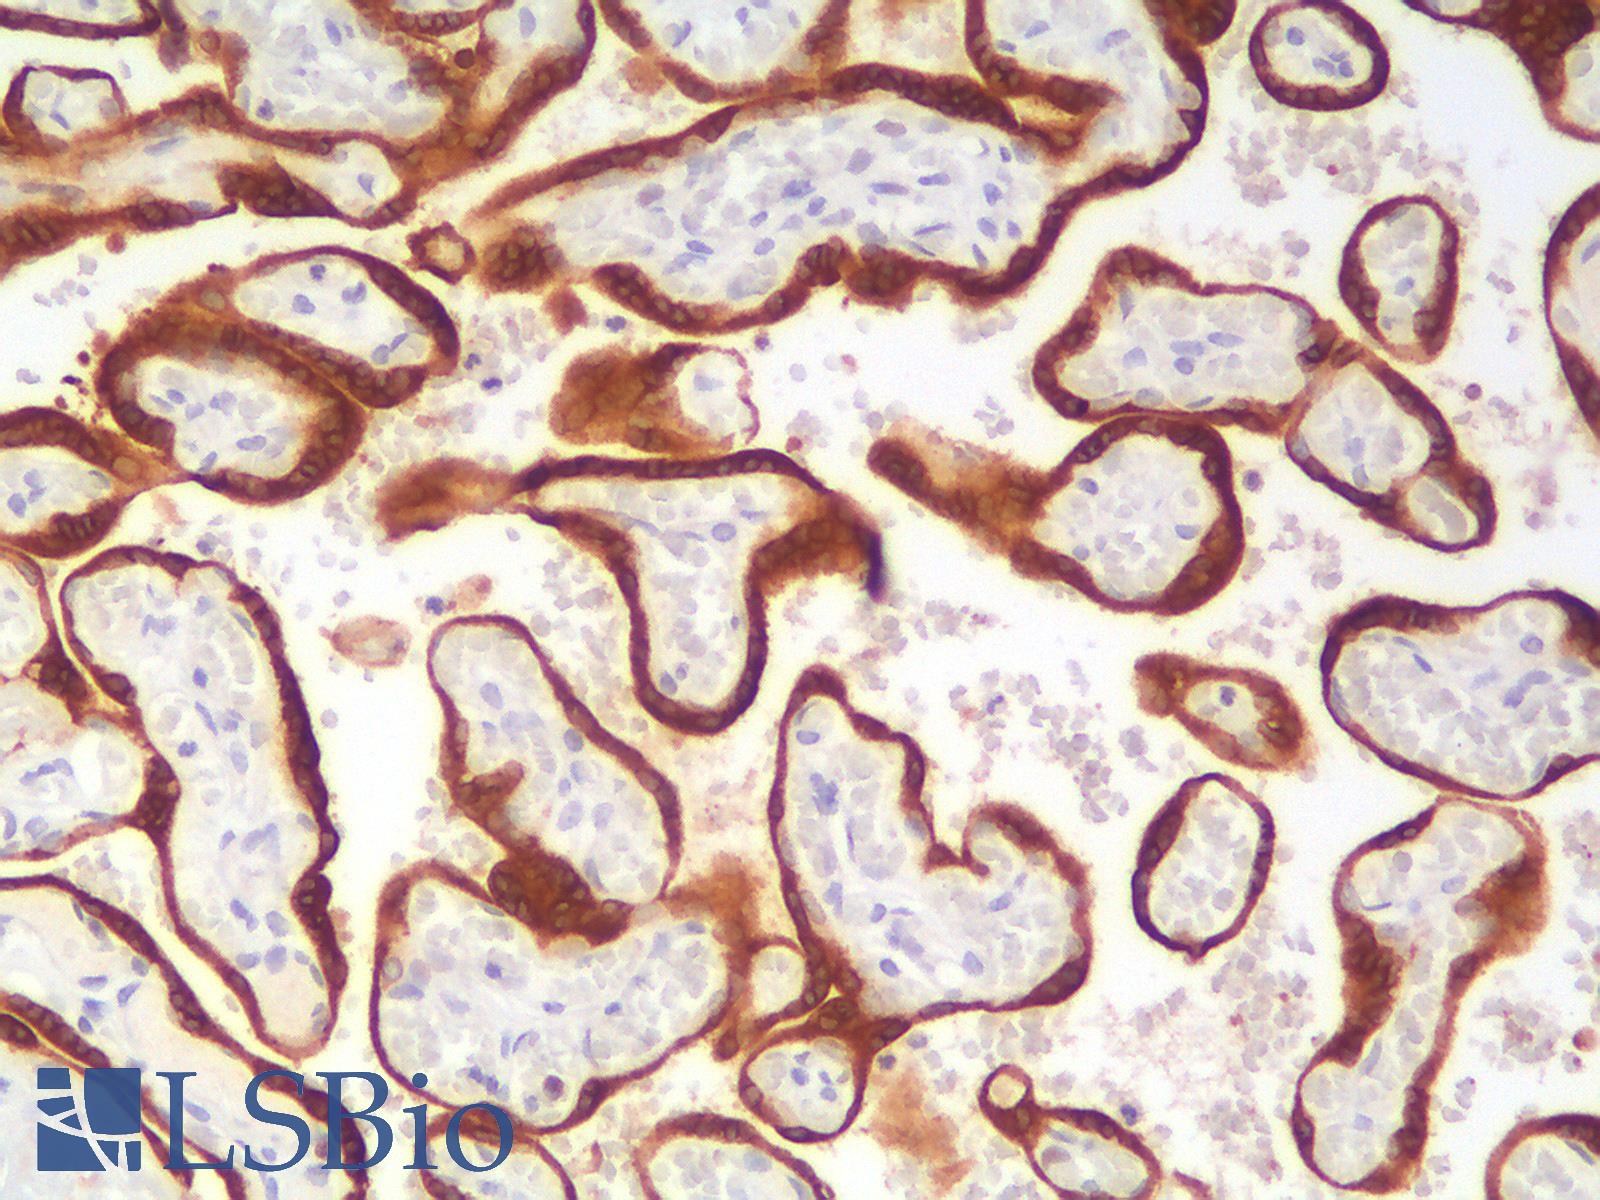 BCL2 / Bcl-2 Antibody - Human Placenta: Formalin-Fixed, Paraffin-Embedded (FFPE)